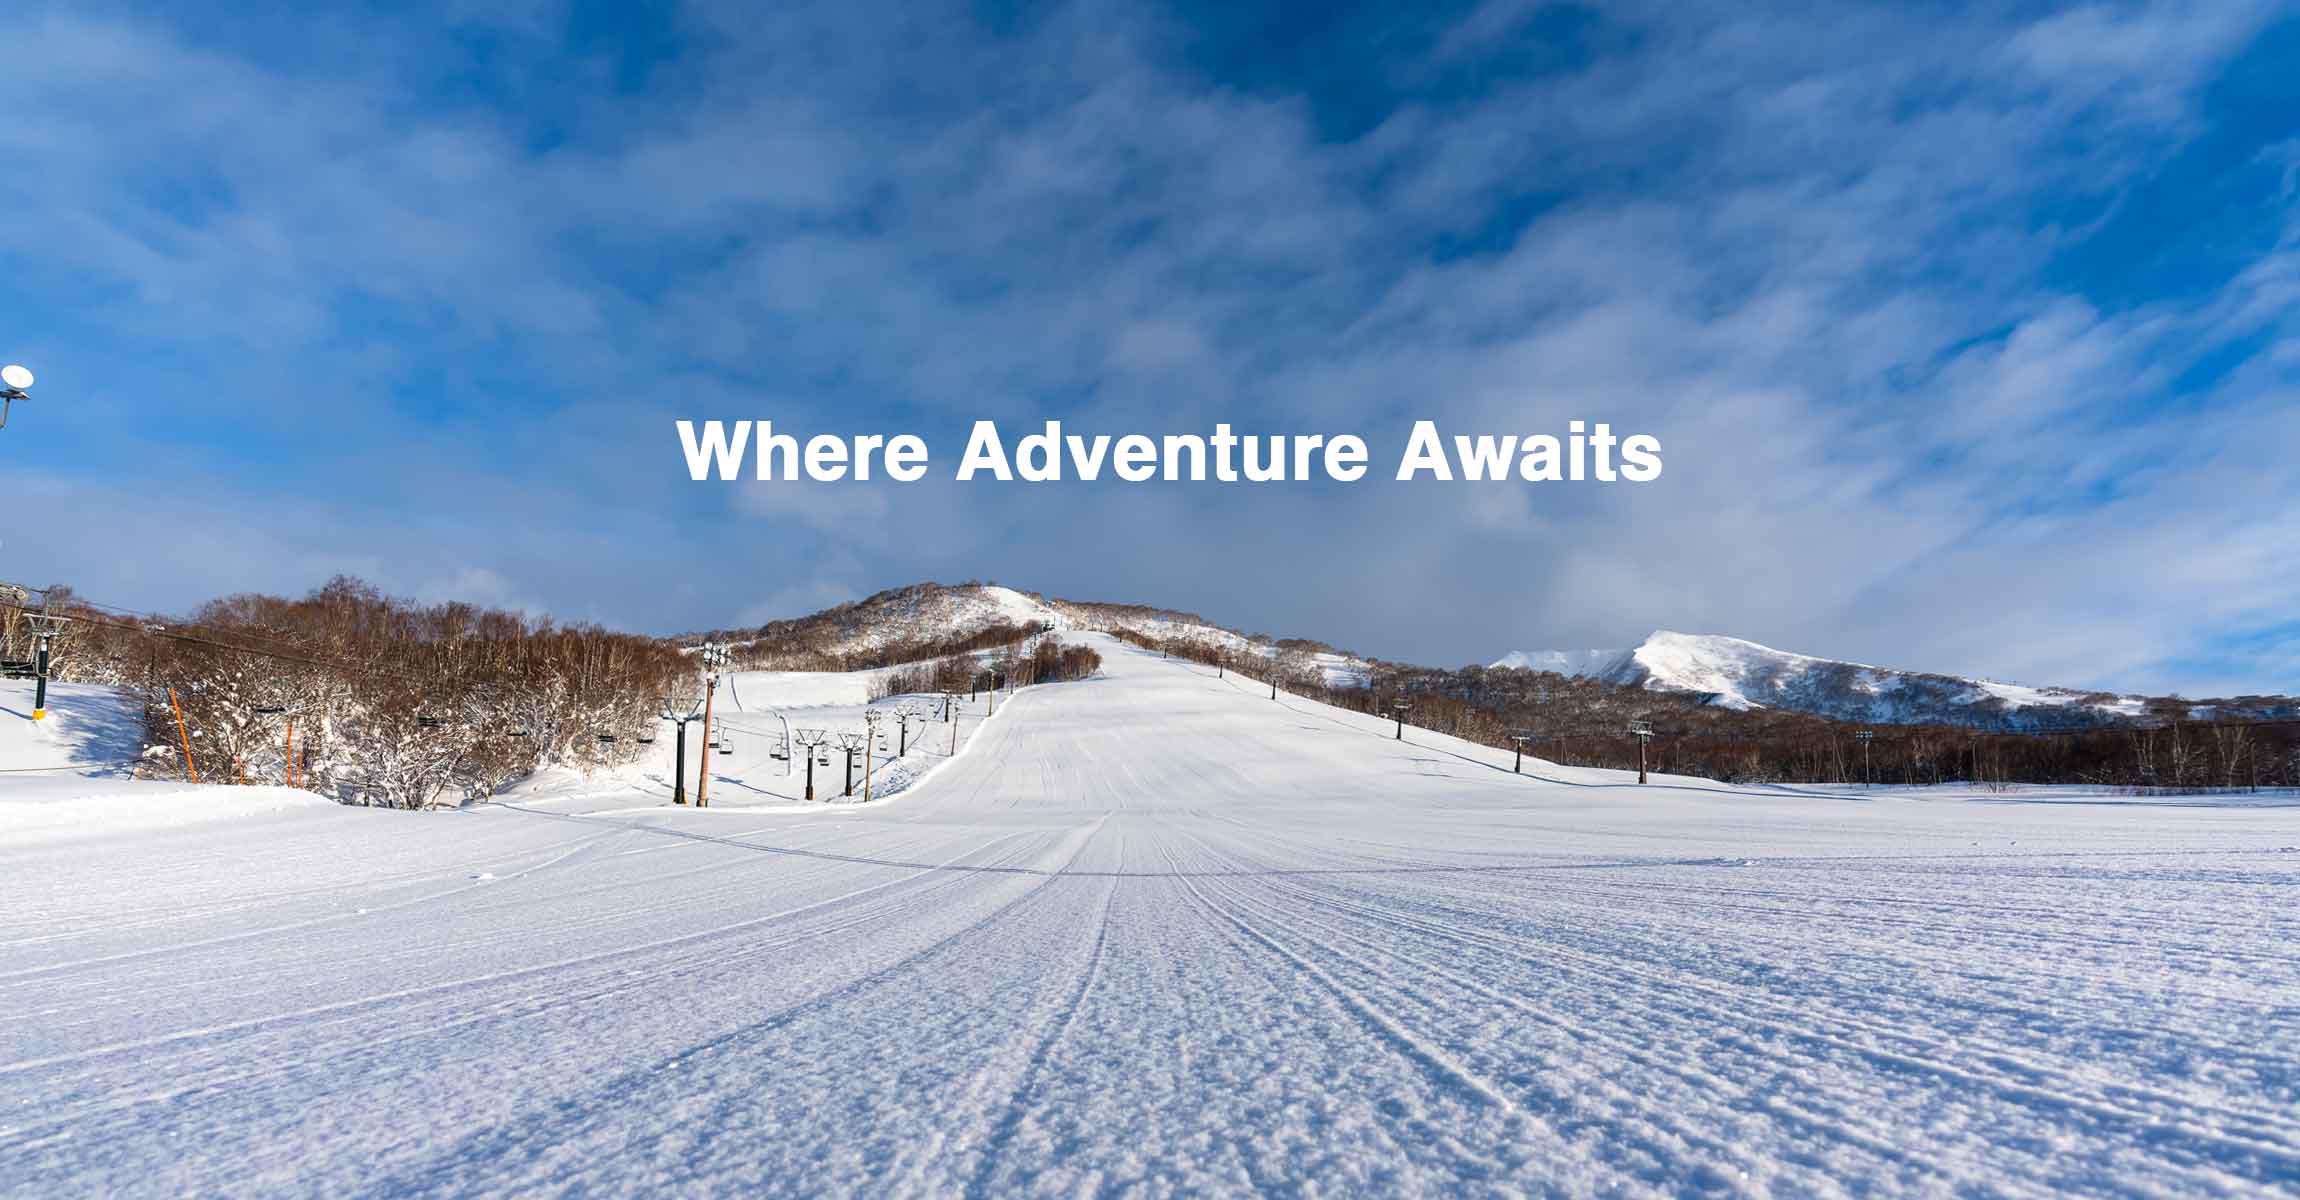 Welcome to Niseko Moiwa Ski Resort,where you can enjoy the some of the best powder snow in Japan.